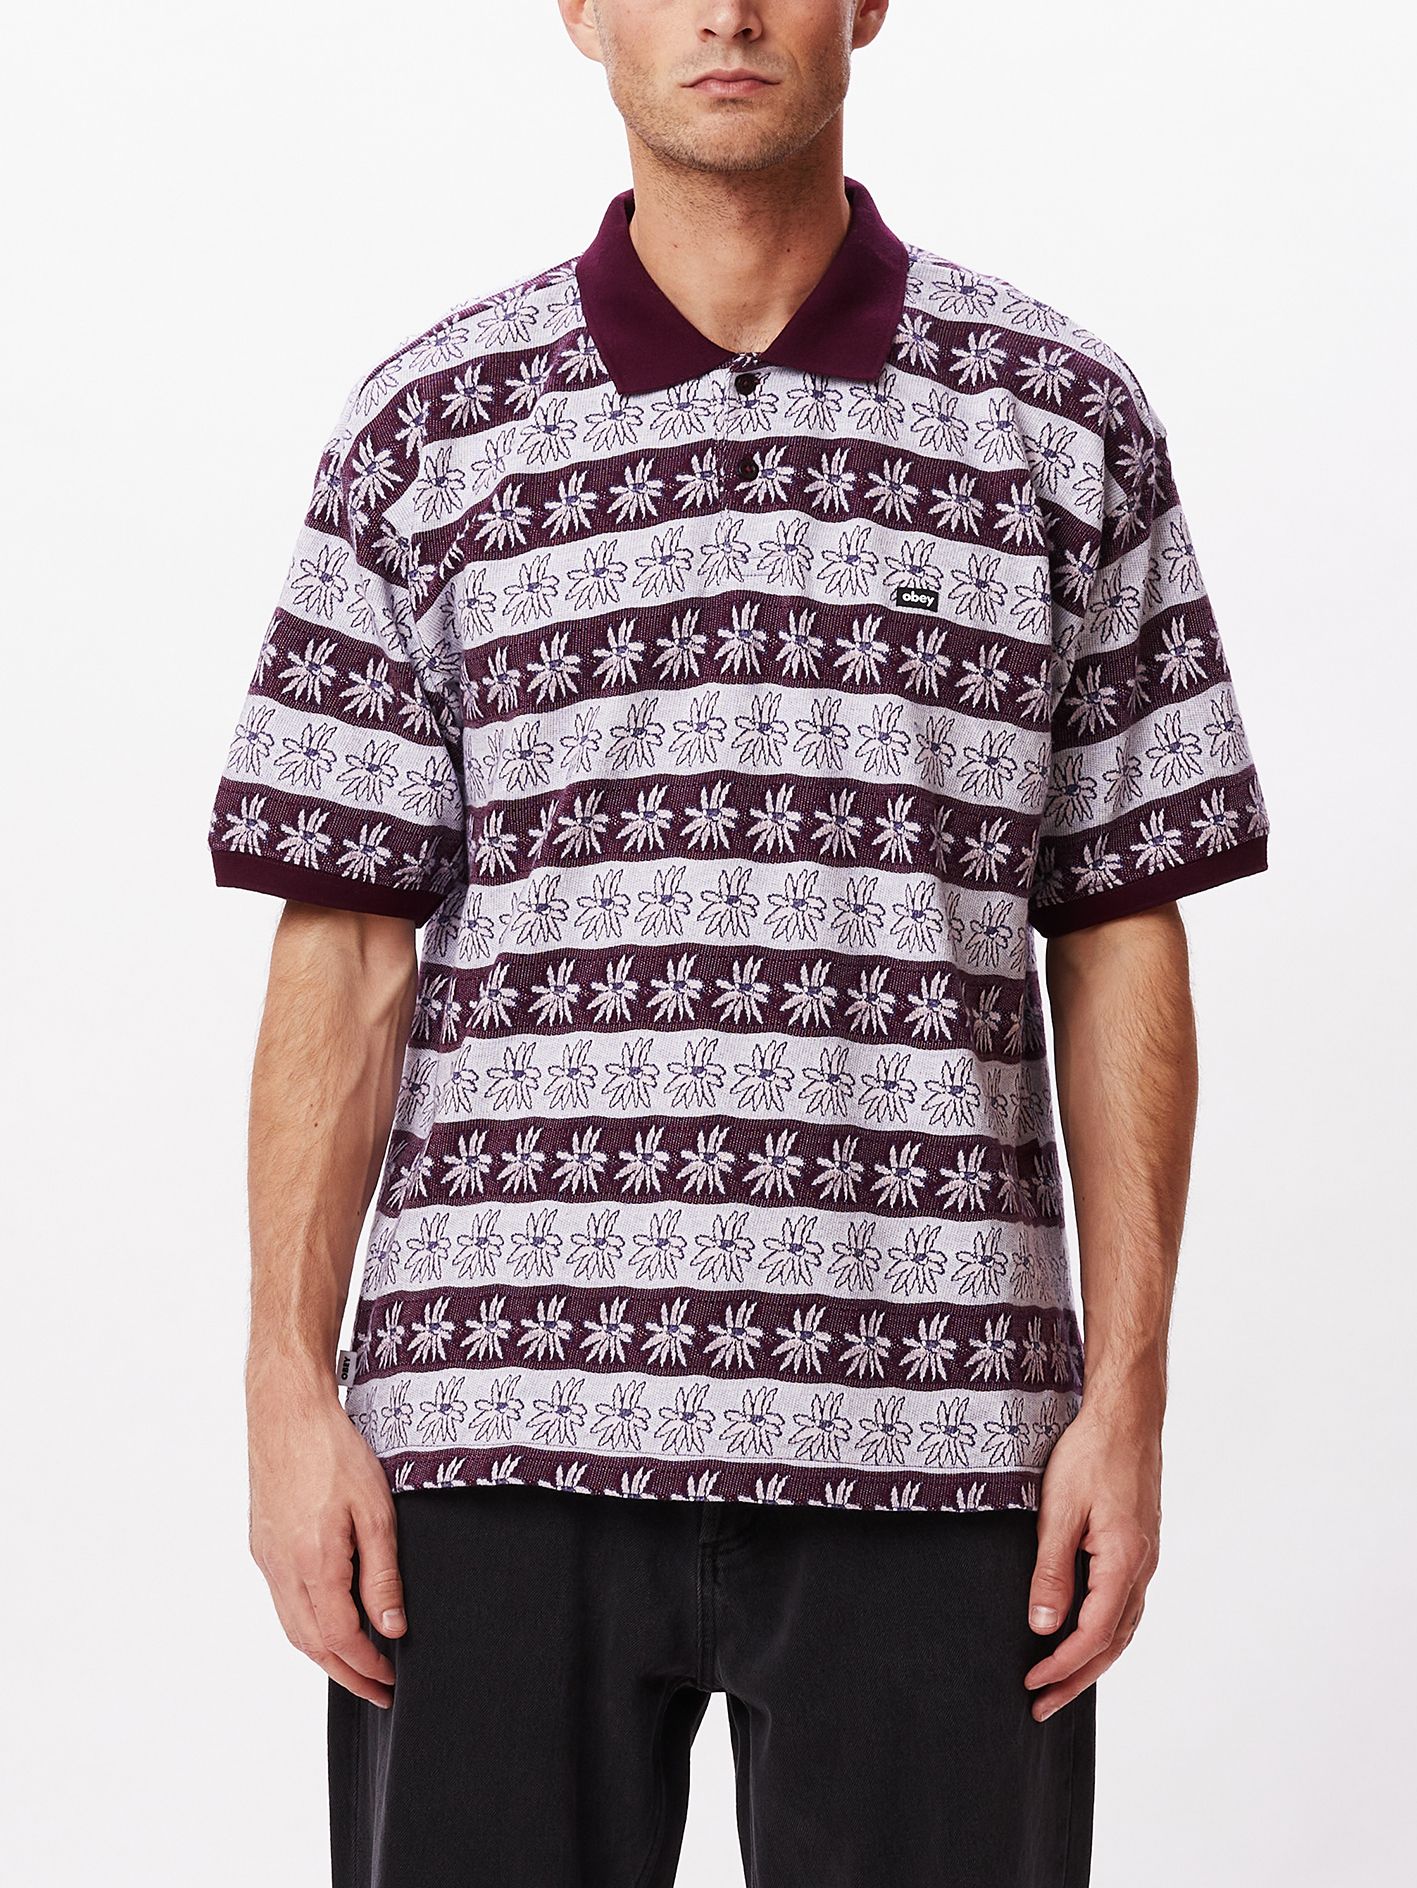 OBEY - ジャガードポロ - UNITY JACQUARD FLOWER POLO SS - BEETROOT